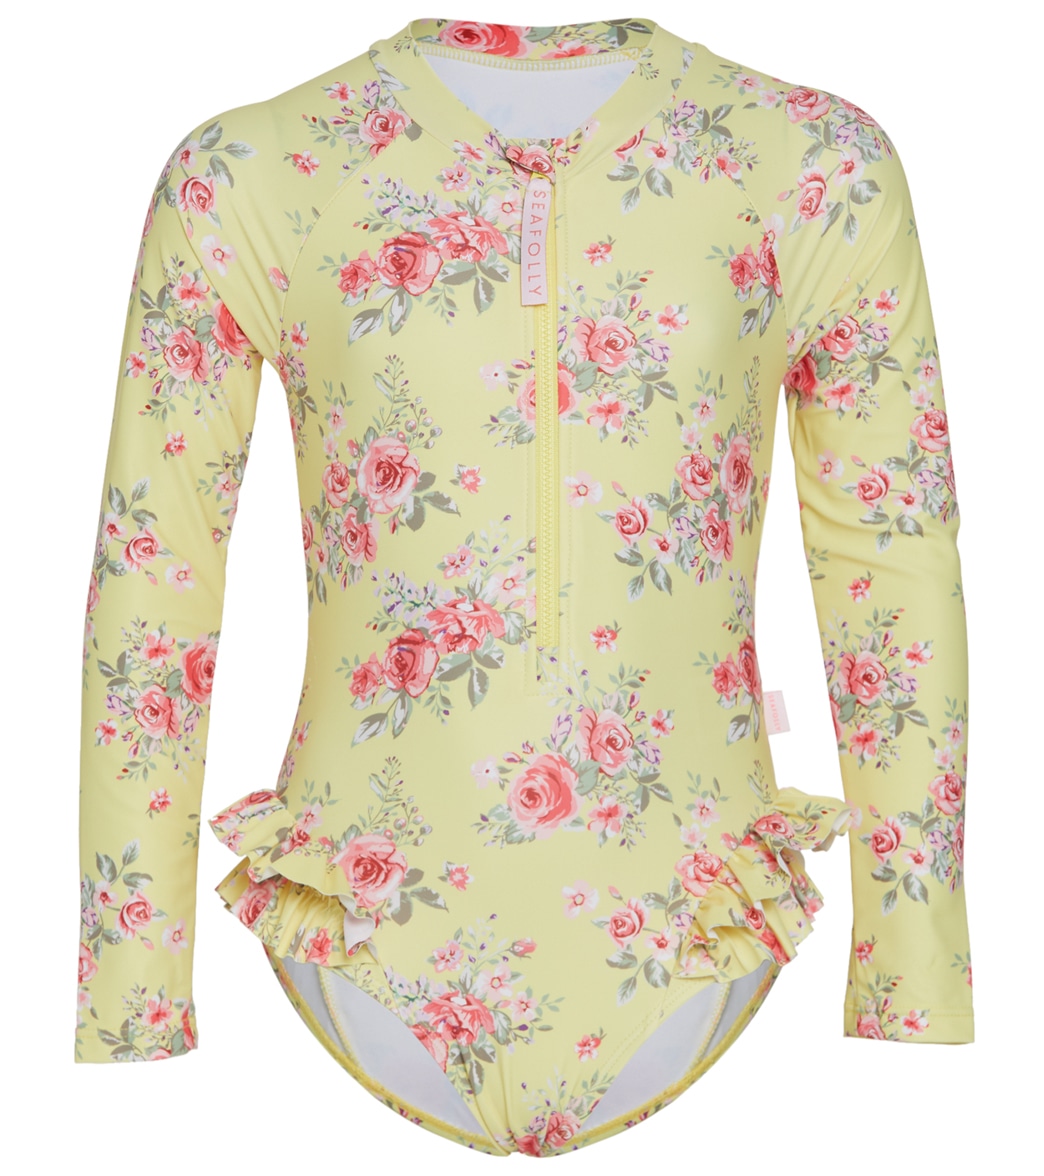 Seafolly Girls' Paradise Garden Long Sleeve One Piece Swimsuit Baby Toddler - Floral 0 - Swimoutlet.com